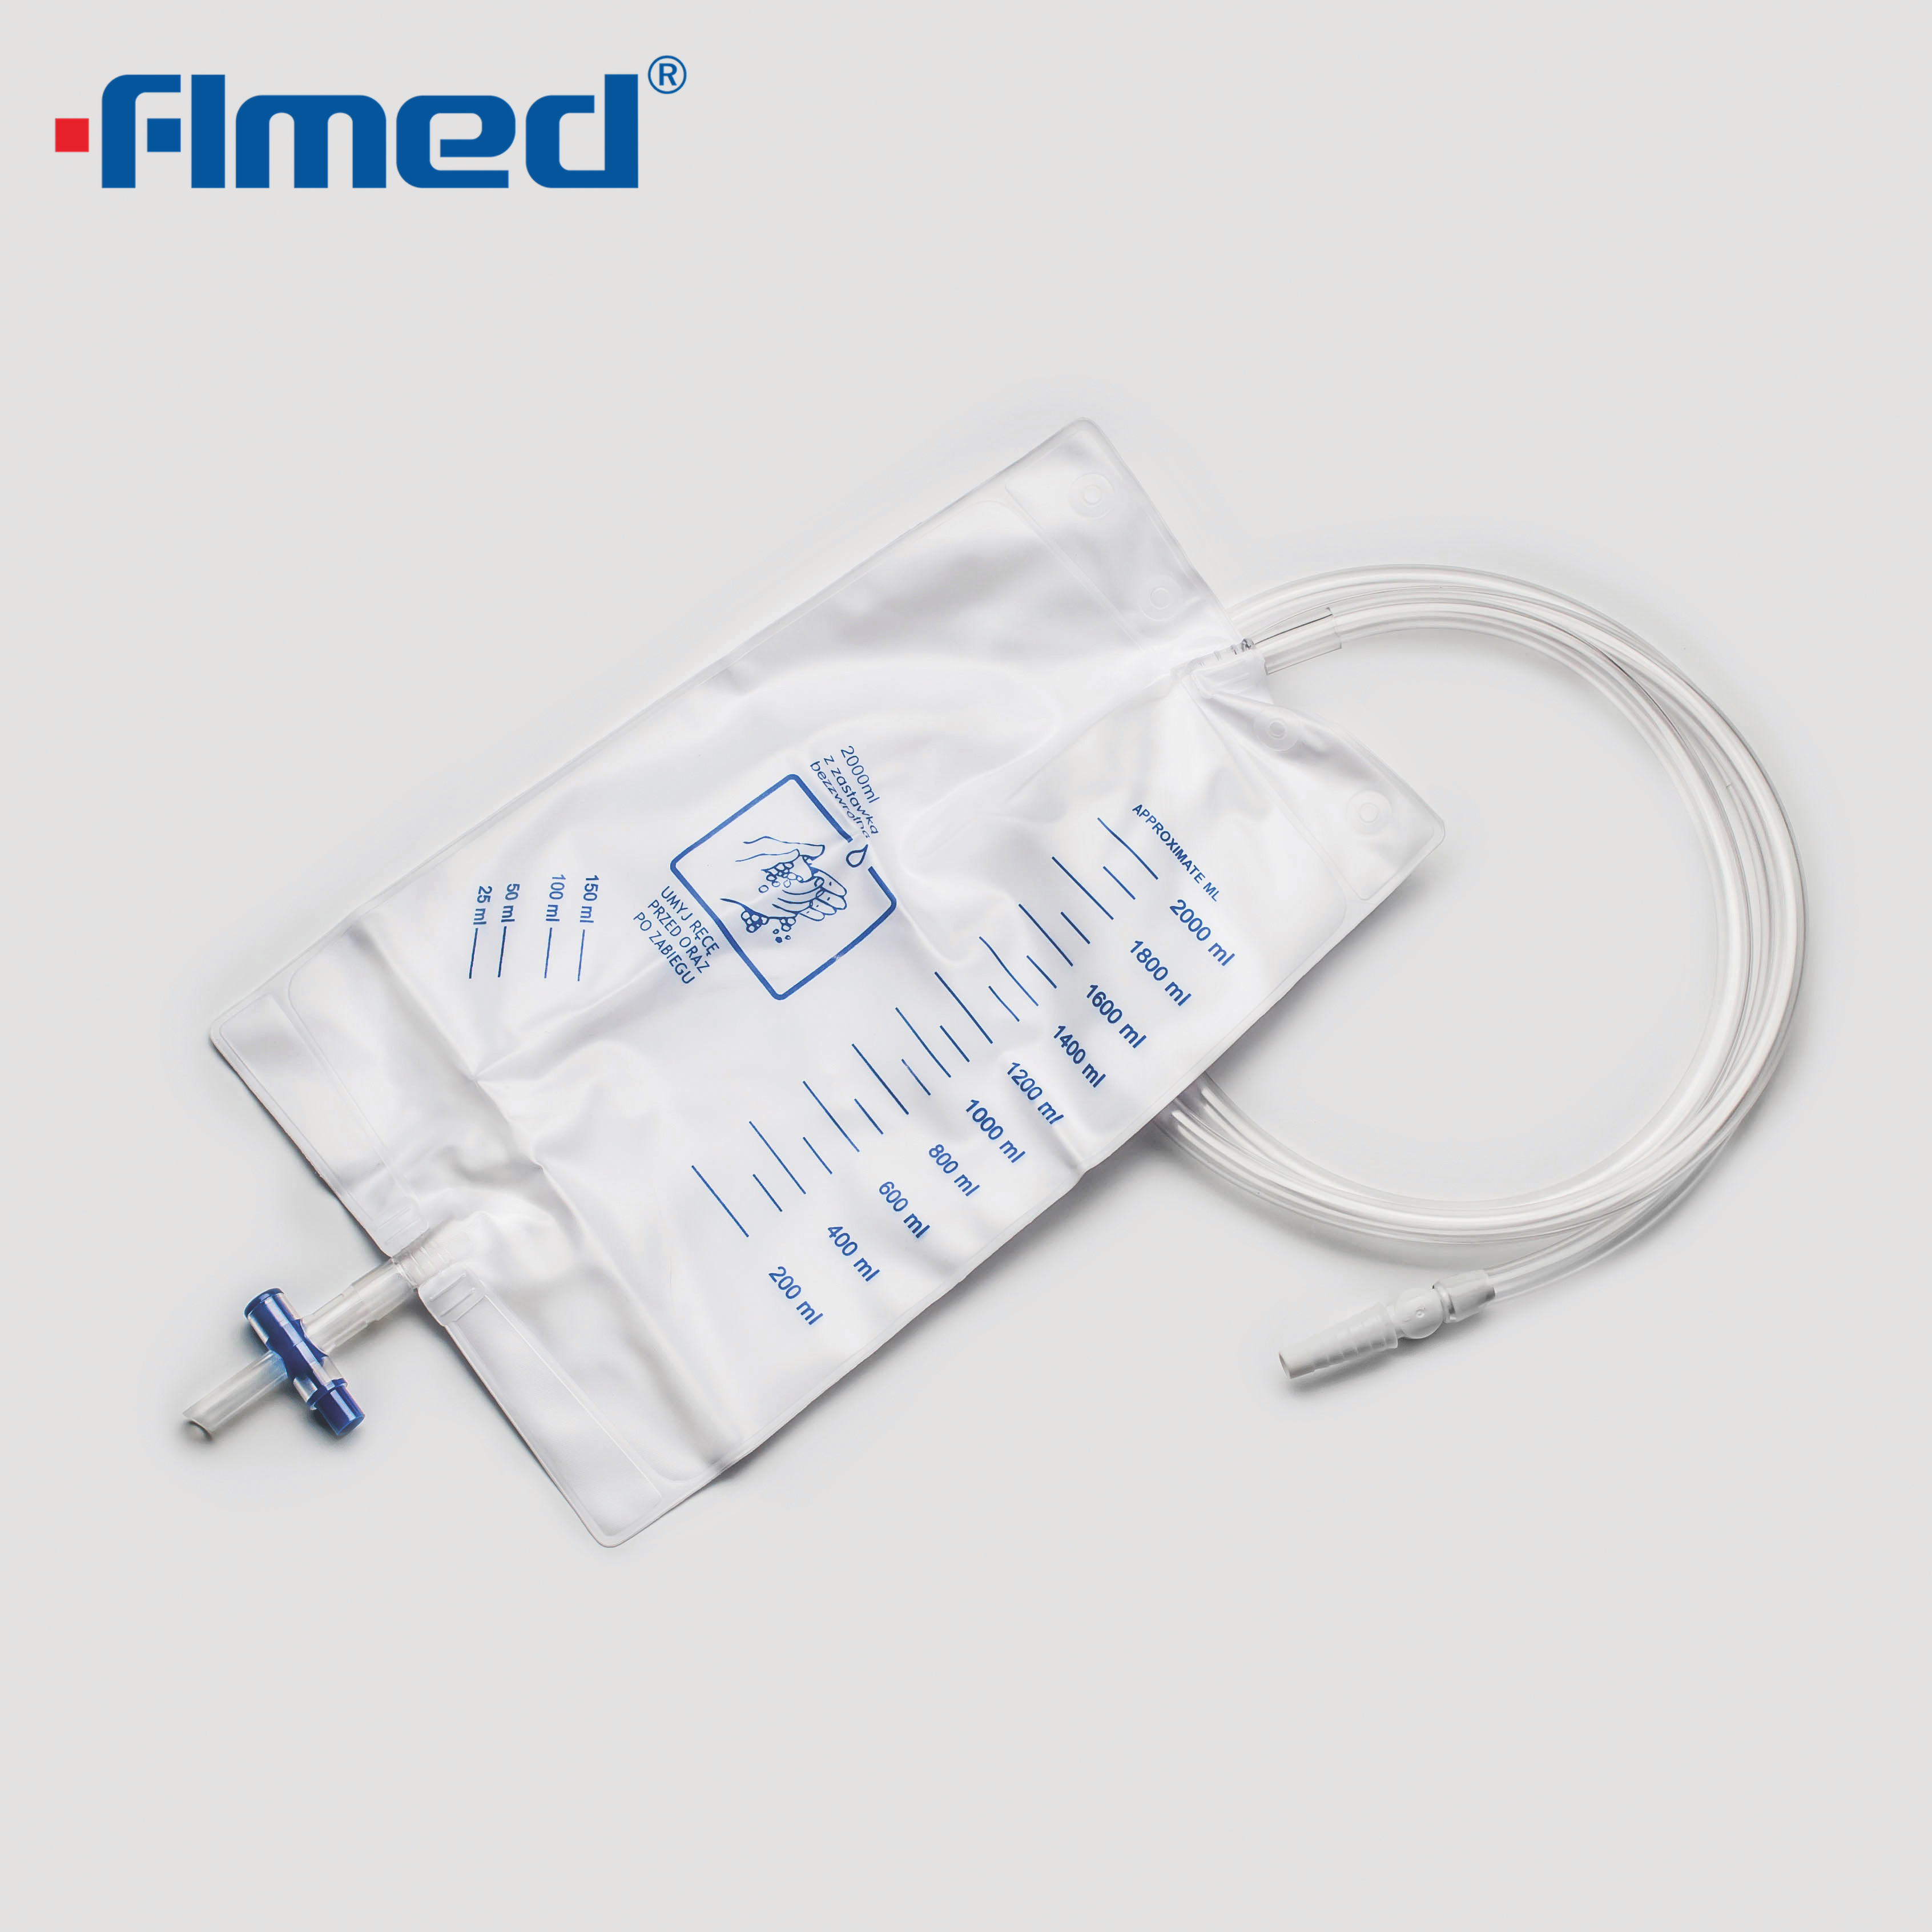 Medical Urinary Drainage Bag with Anti Reflux Device 2000Ml